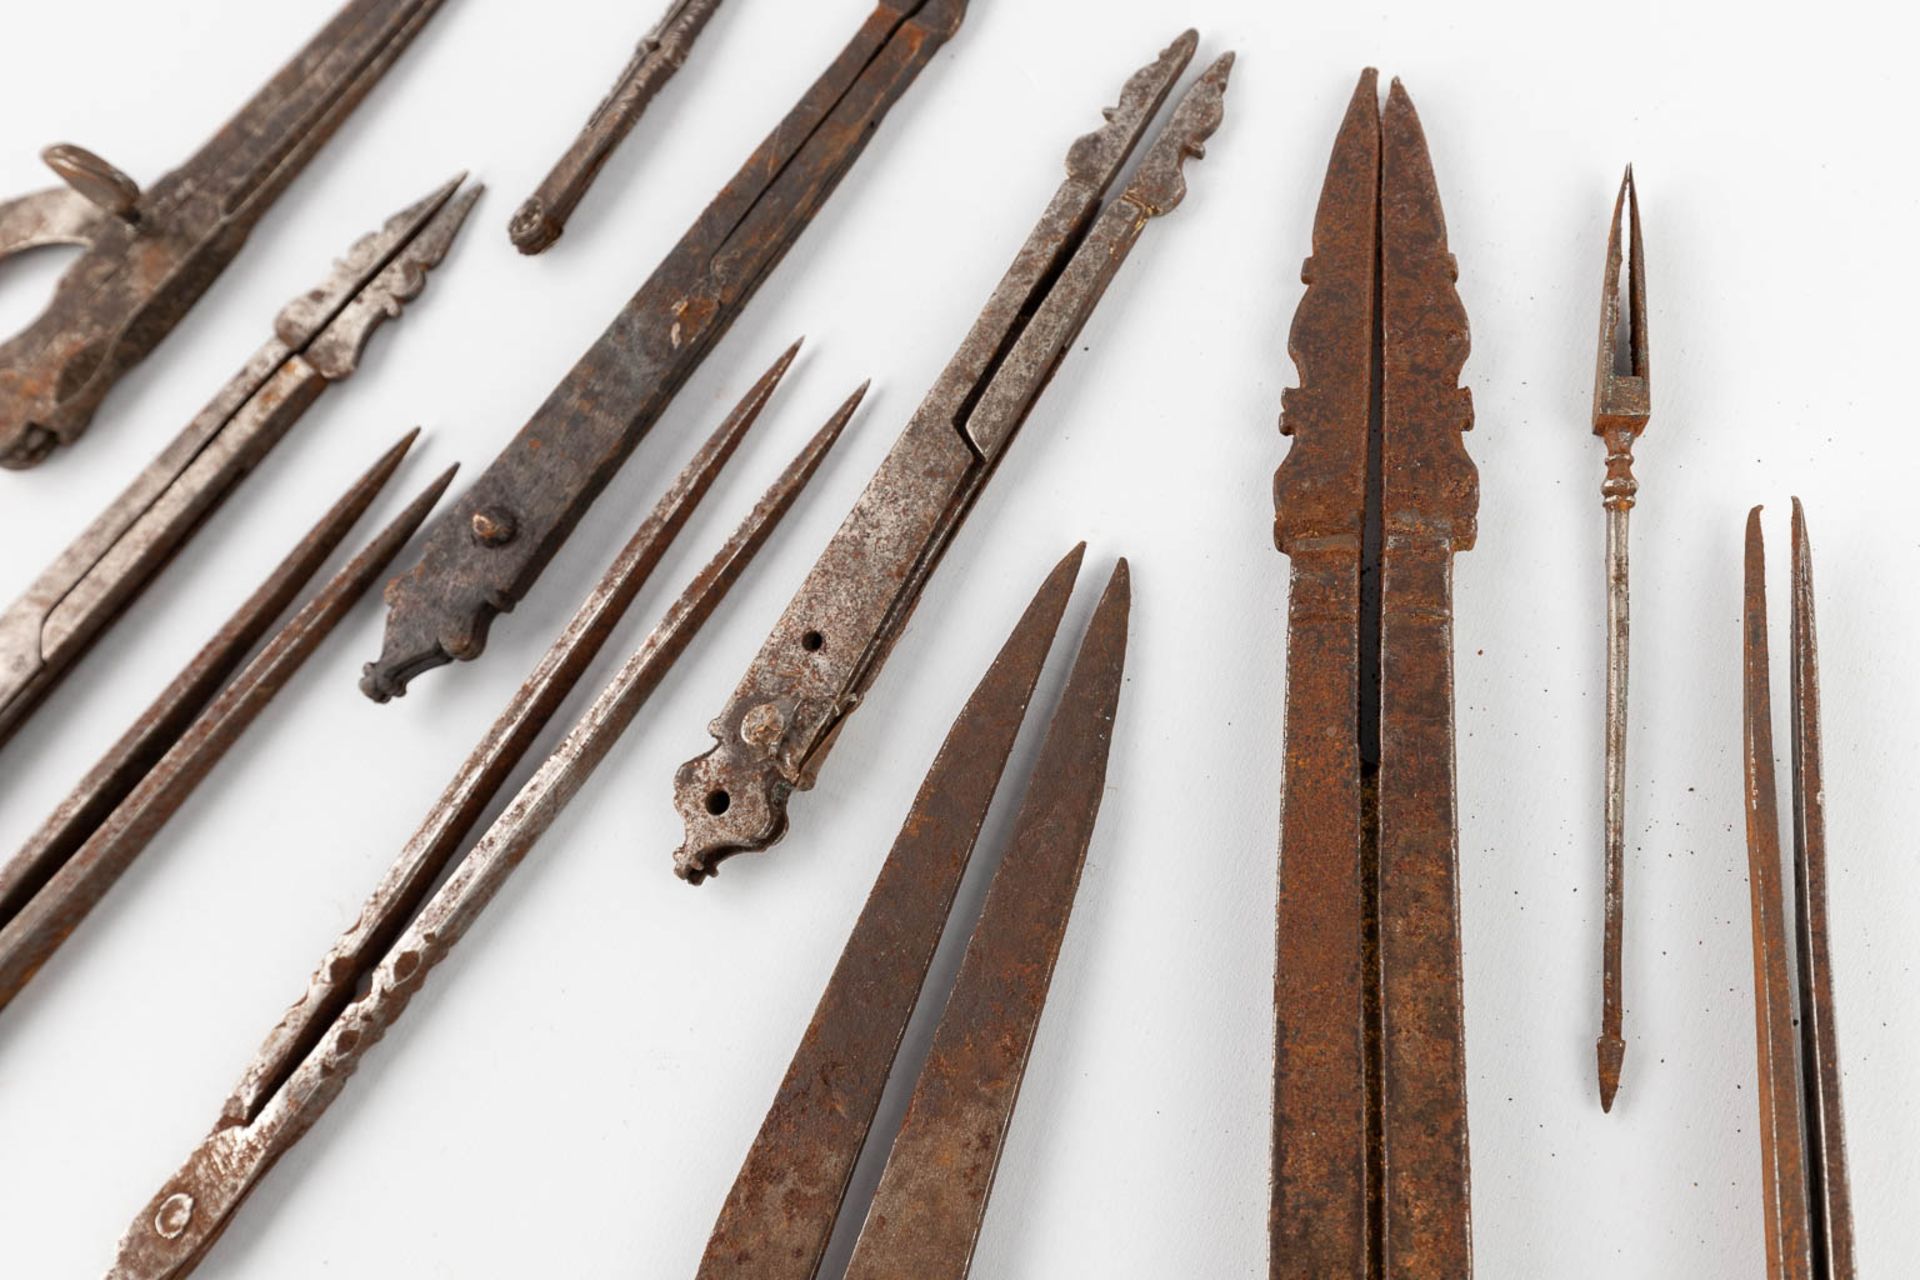 A large collection of 14 Ottoman steel measuring and marking devices and astronomy, Islamic arts. Ot - Image 6 of 7